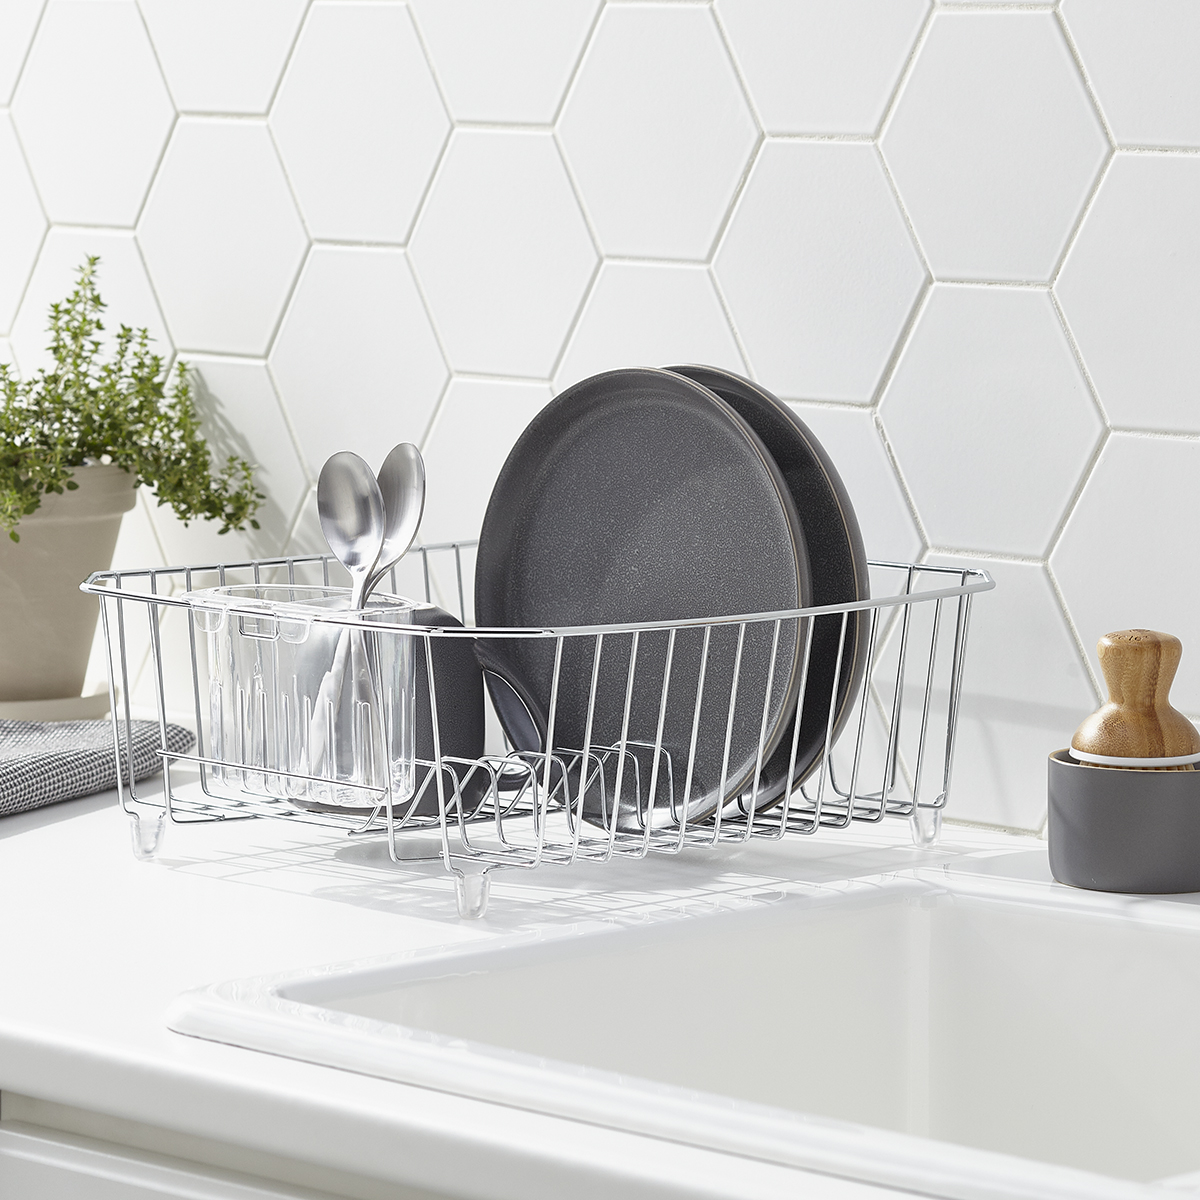 https://www.containerstore.com/catalogimages/420411/10078129_TwinSink-DishDrainer_Chrome.jpg